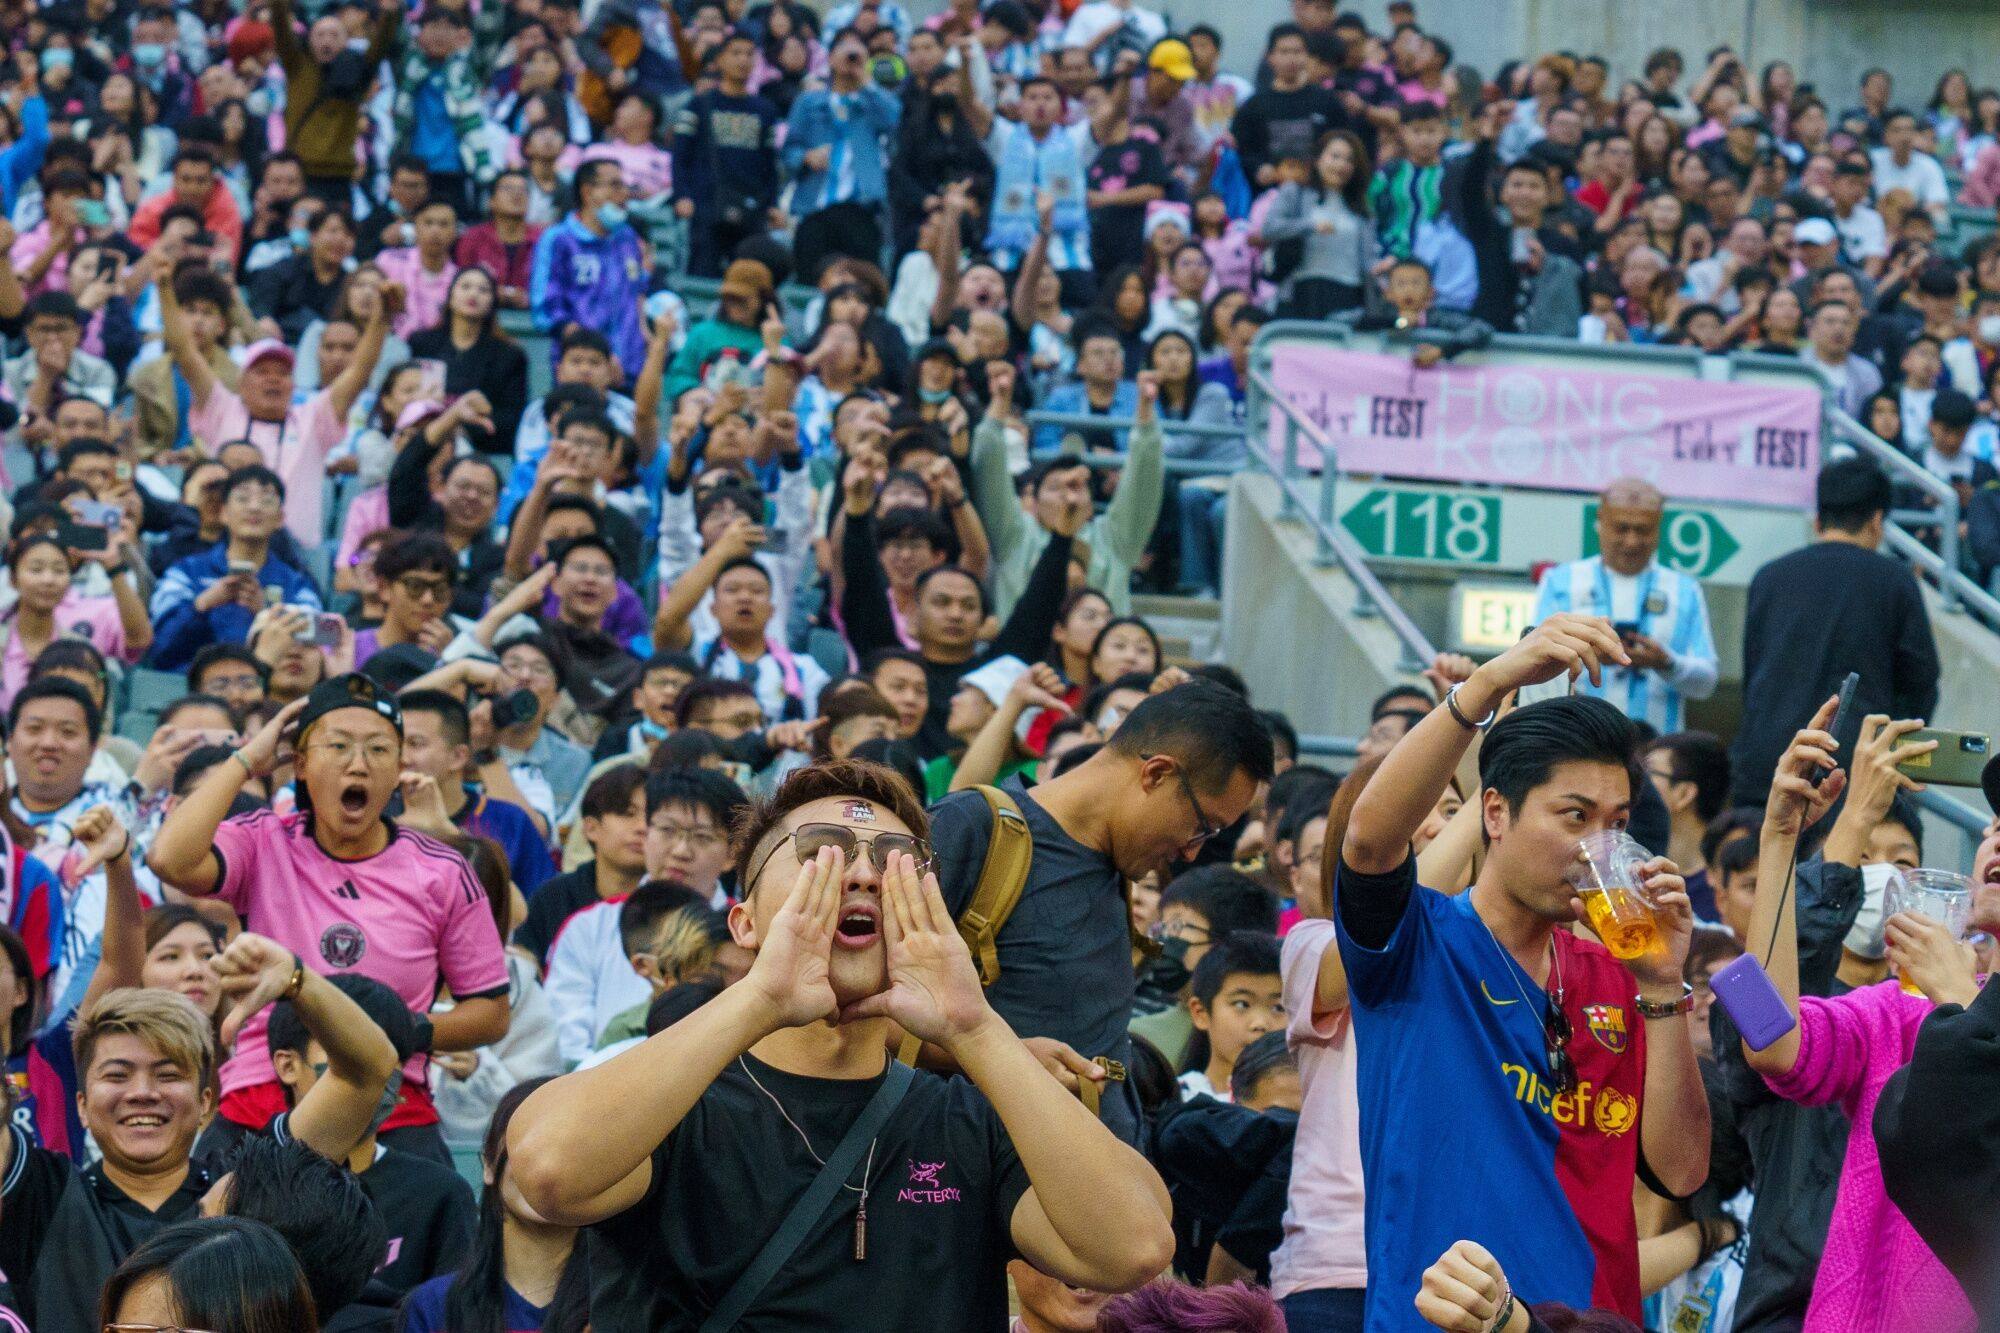 Spectators show their disapproval during Inter Miami’s match in Hong Kong last month. Photo: Bloomberg